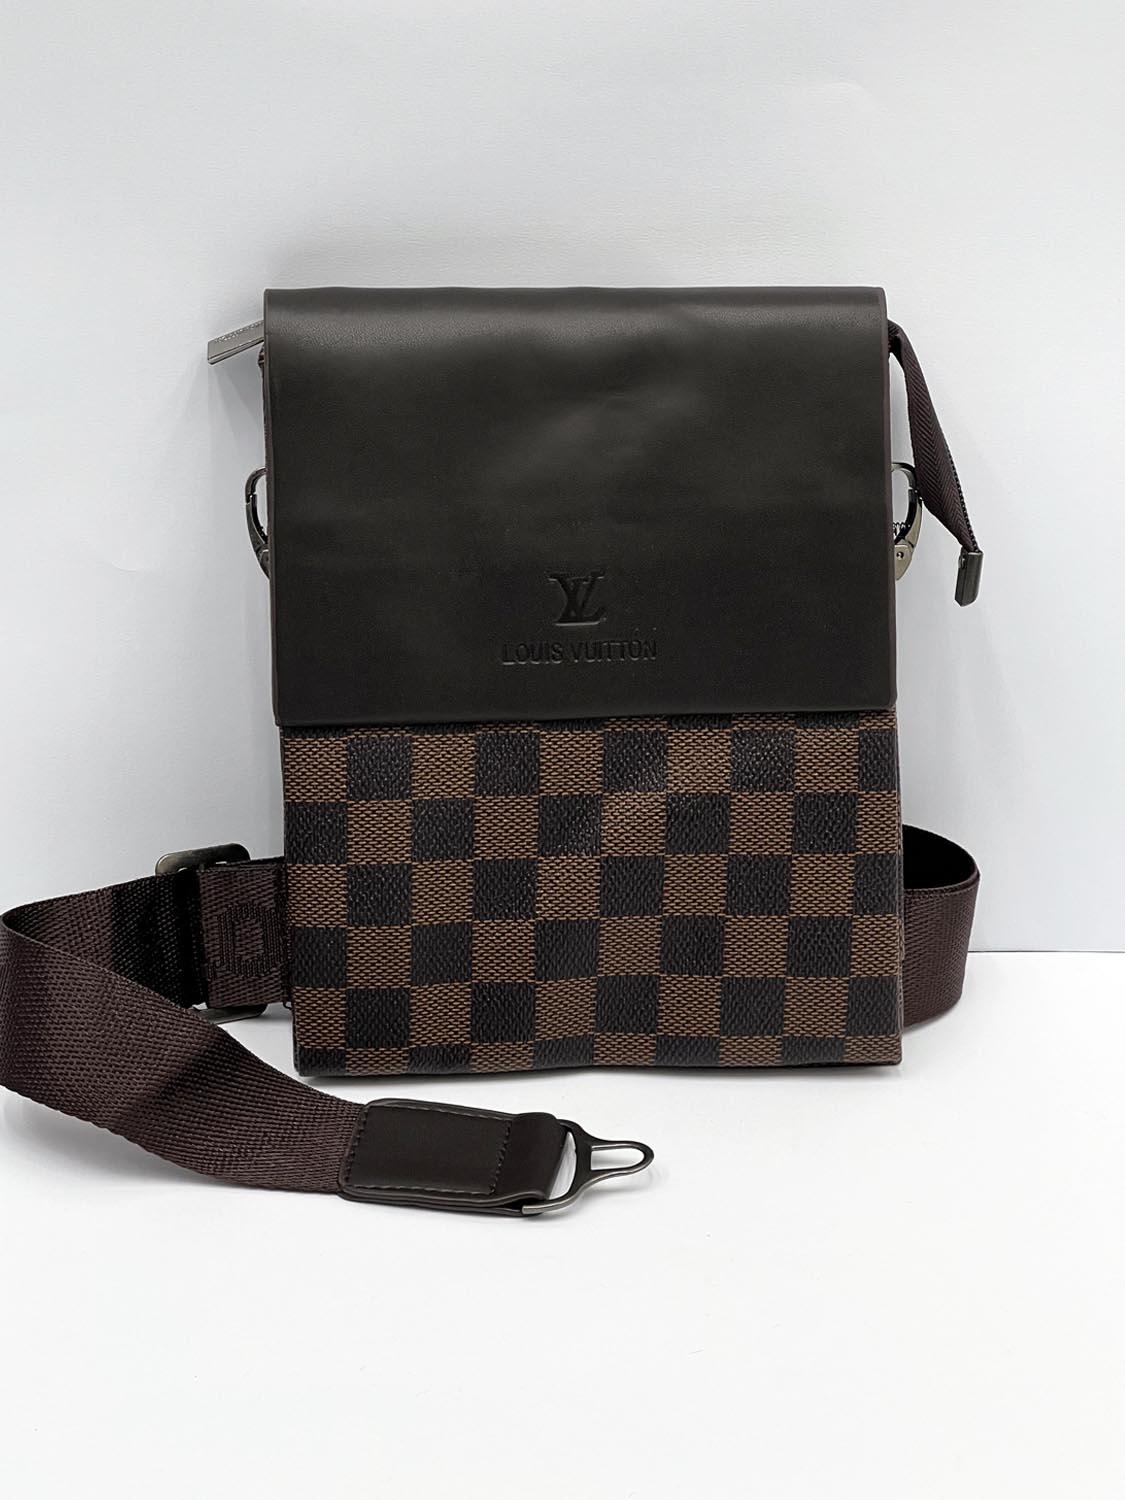 Lus Vtn All Over Texture Cross Body Bag in Brown